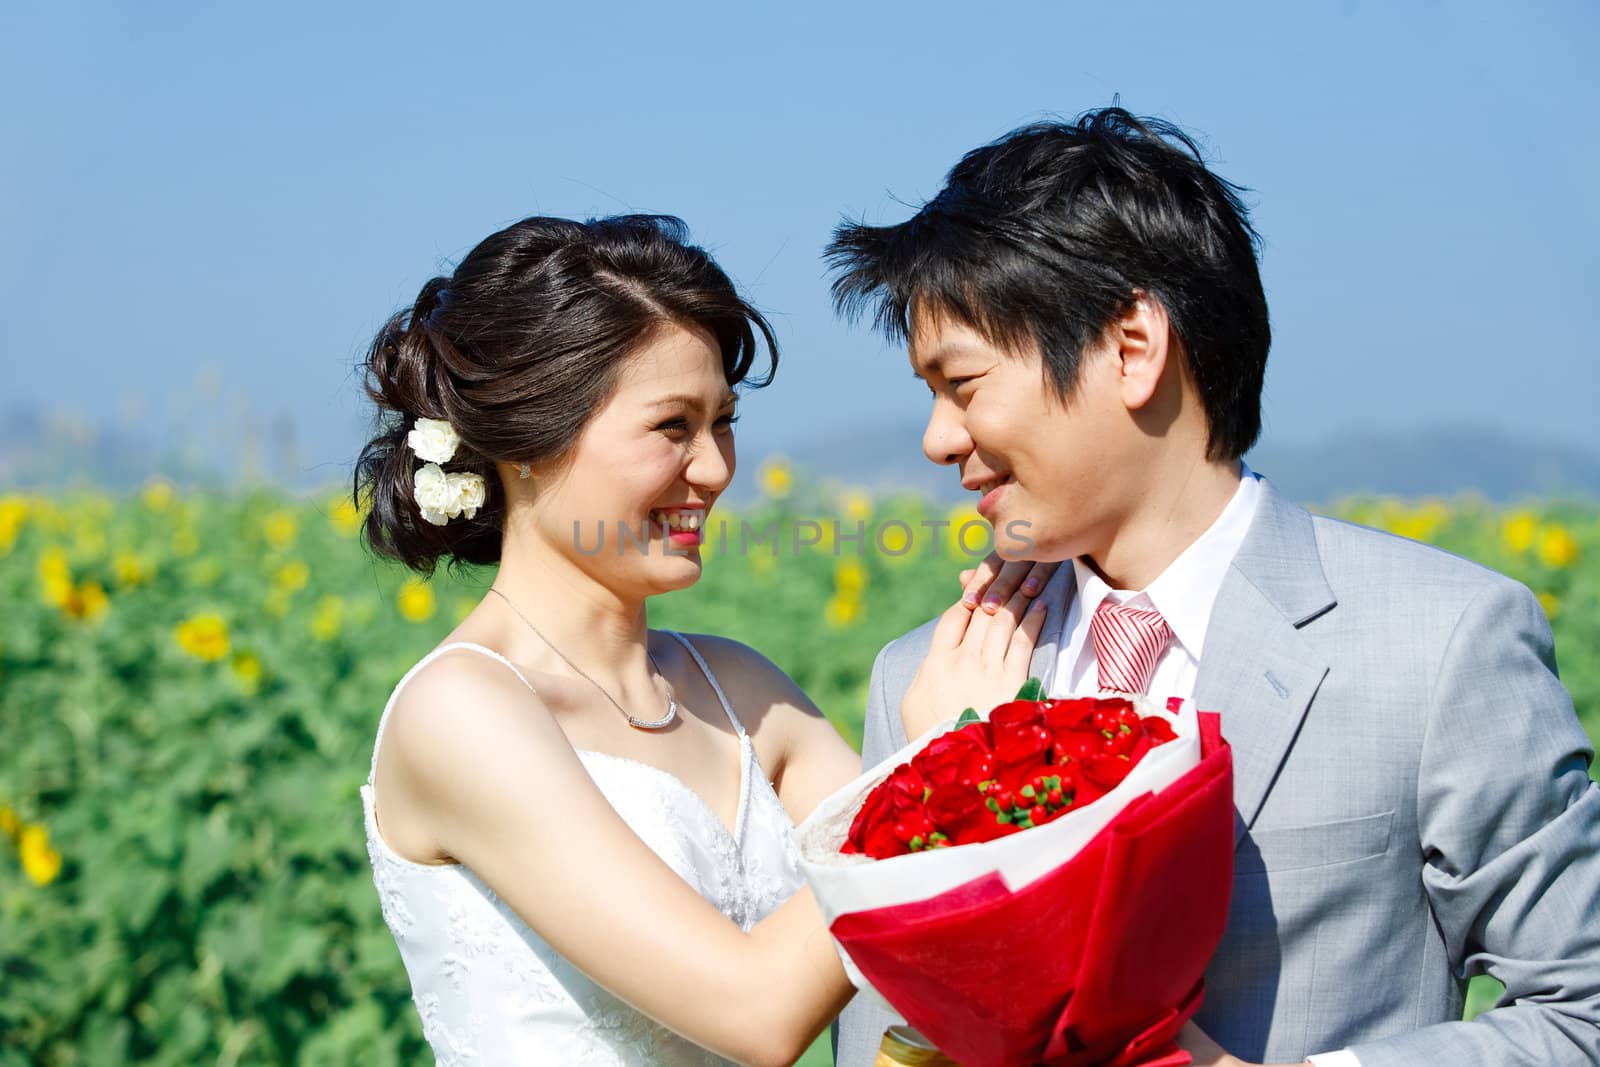 portrait of bride and groom seeing each other on sunflower field by vichie81